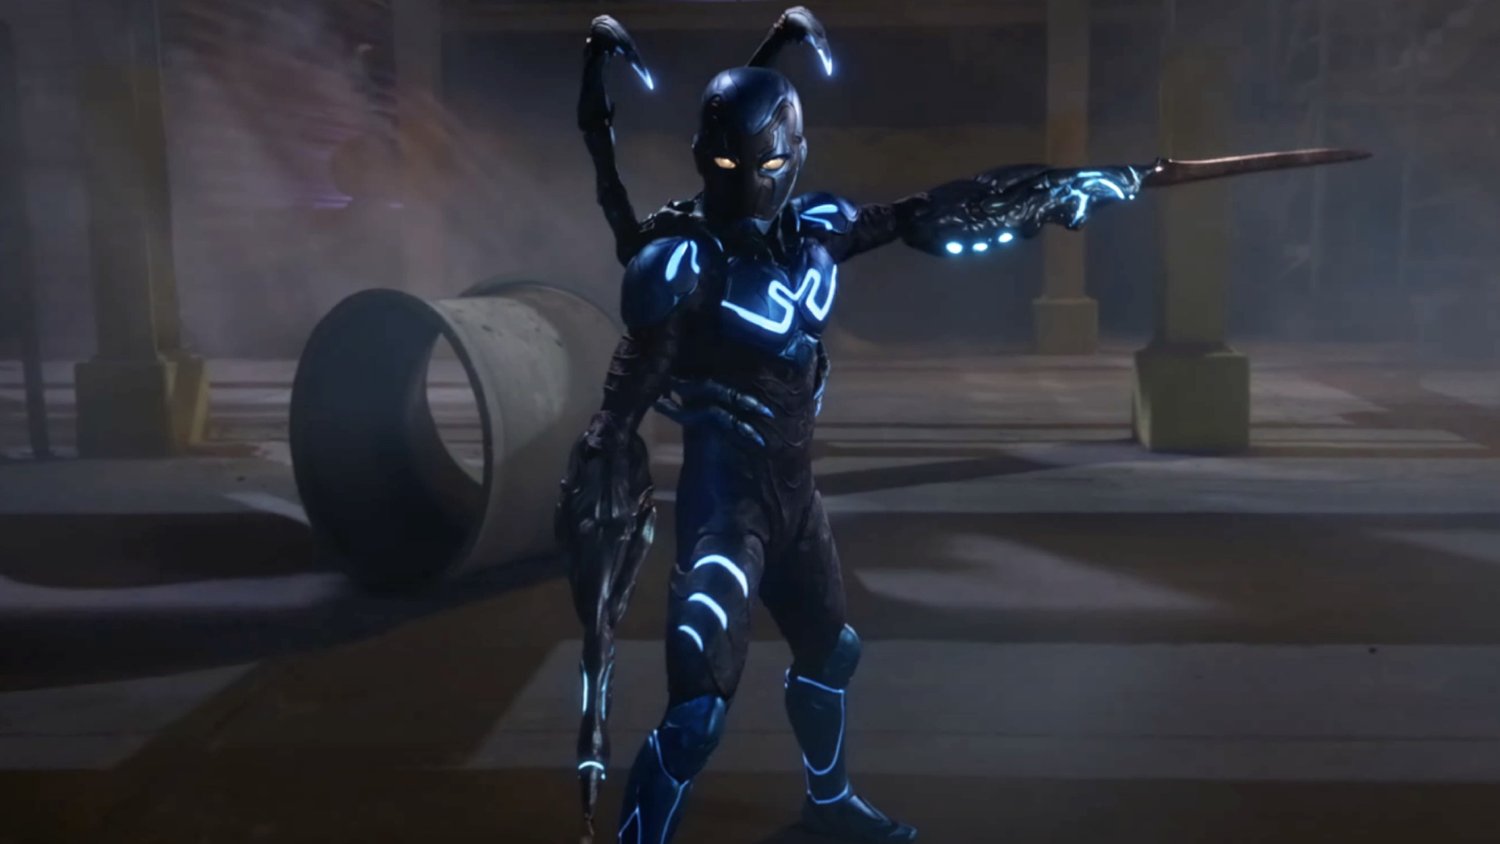 The Fight Scenes in BLUE BEETLE Were Inspired By THE RAID and INJUSTICE 2